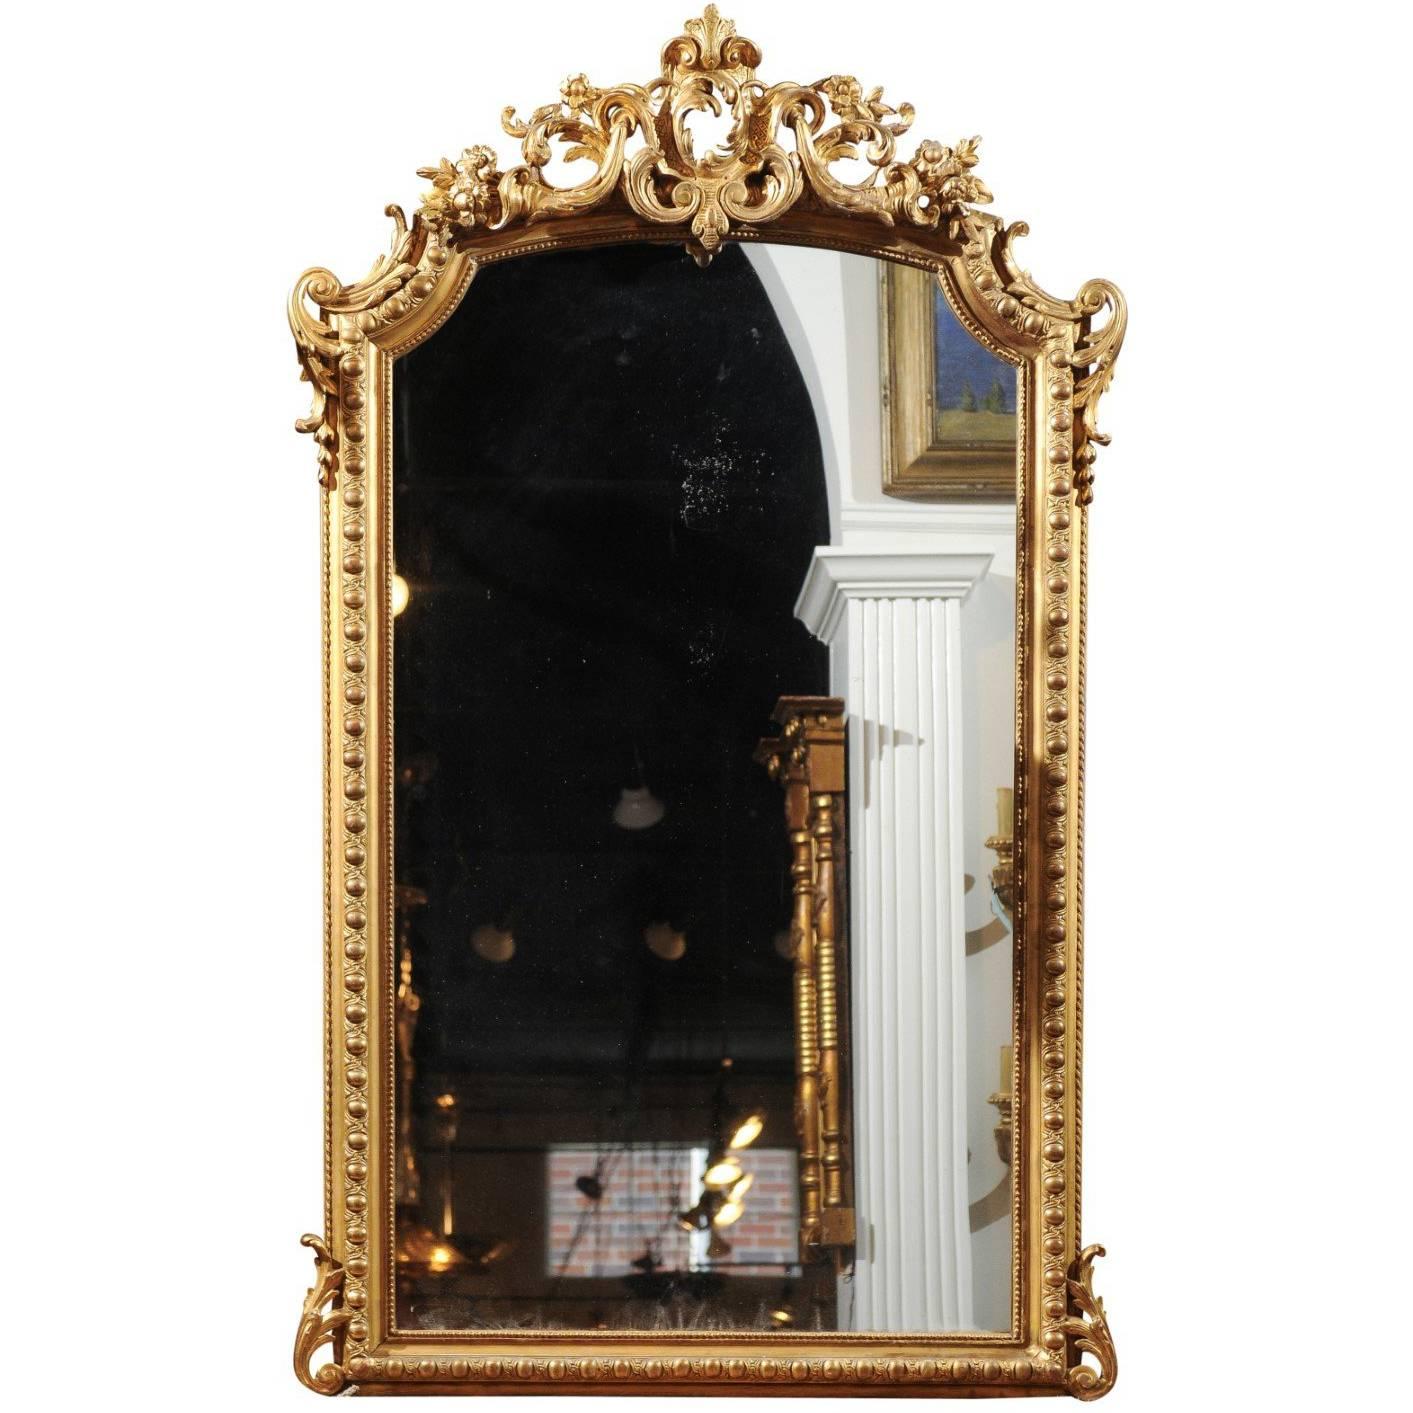 French Rococo Style Giltwood Mirror with Cartouche Carved Crest, 19th Century